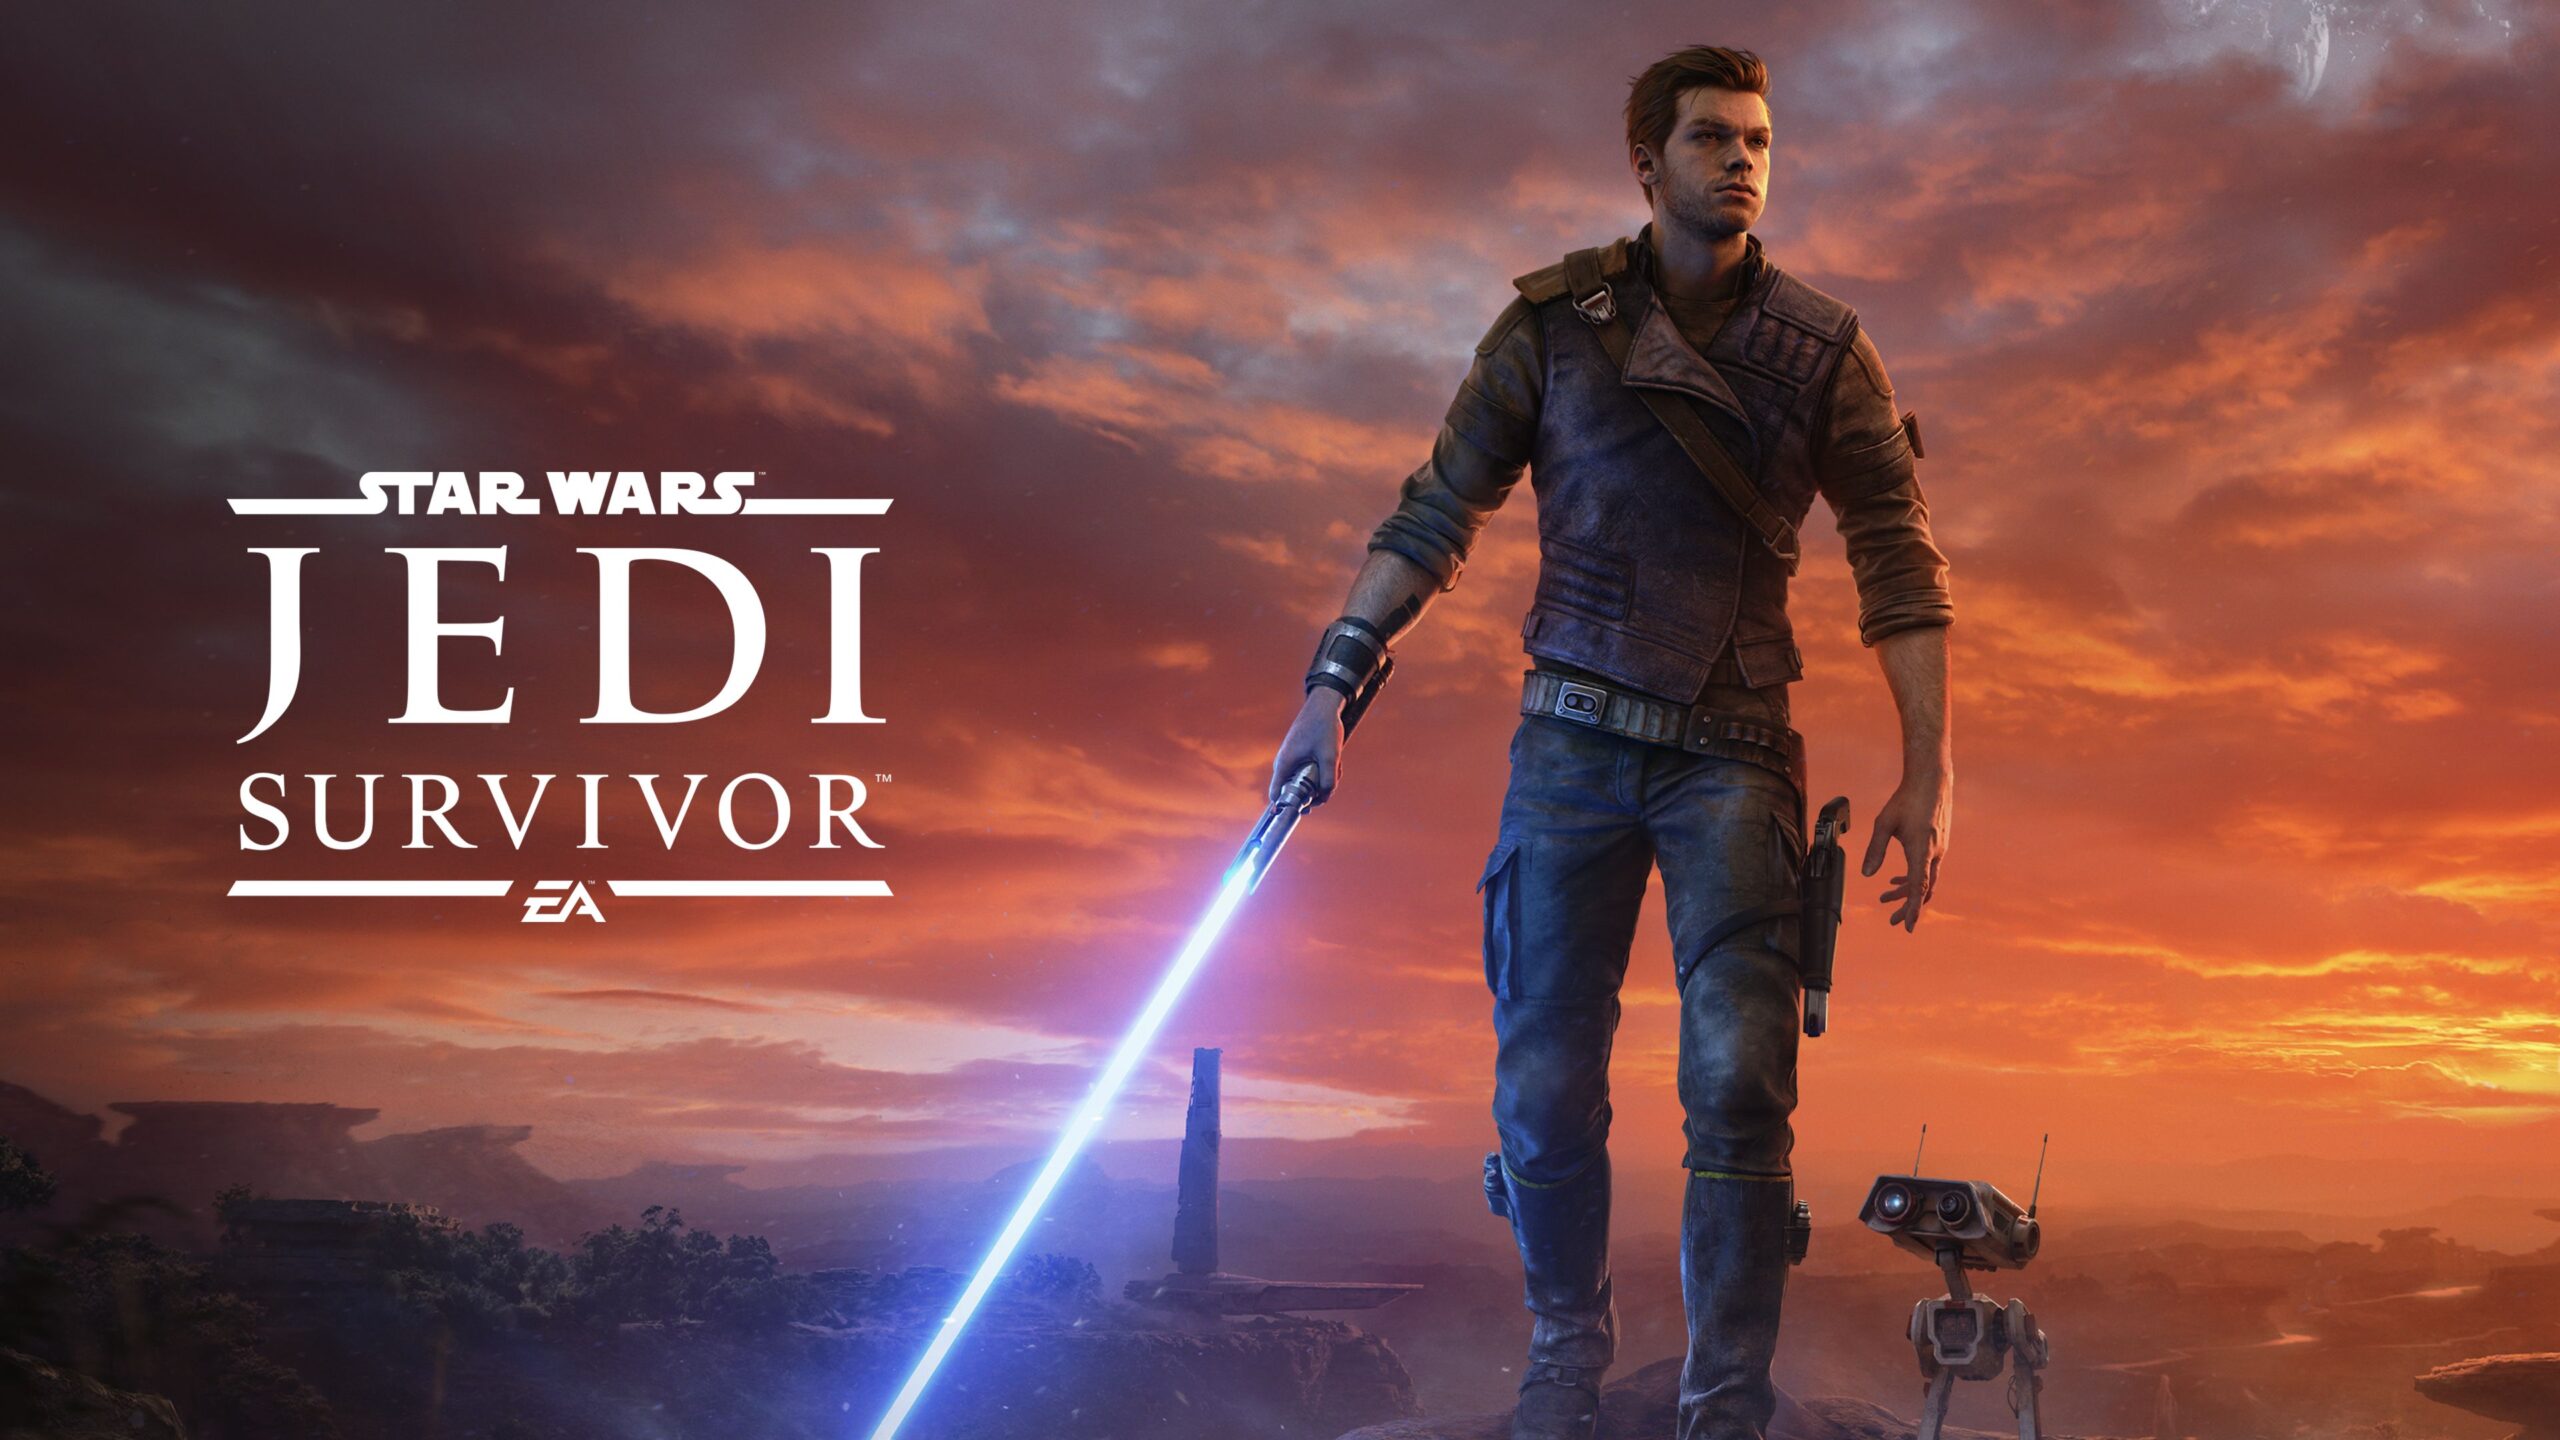 Star Wars Jedi: Survivor Now Available for Pre-order on the Xbox Store